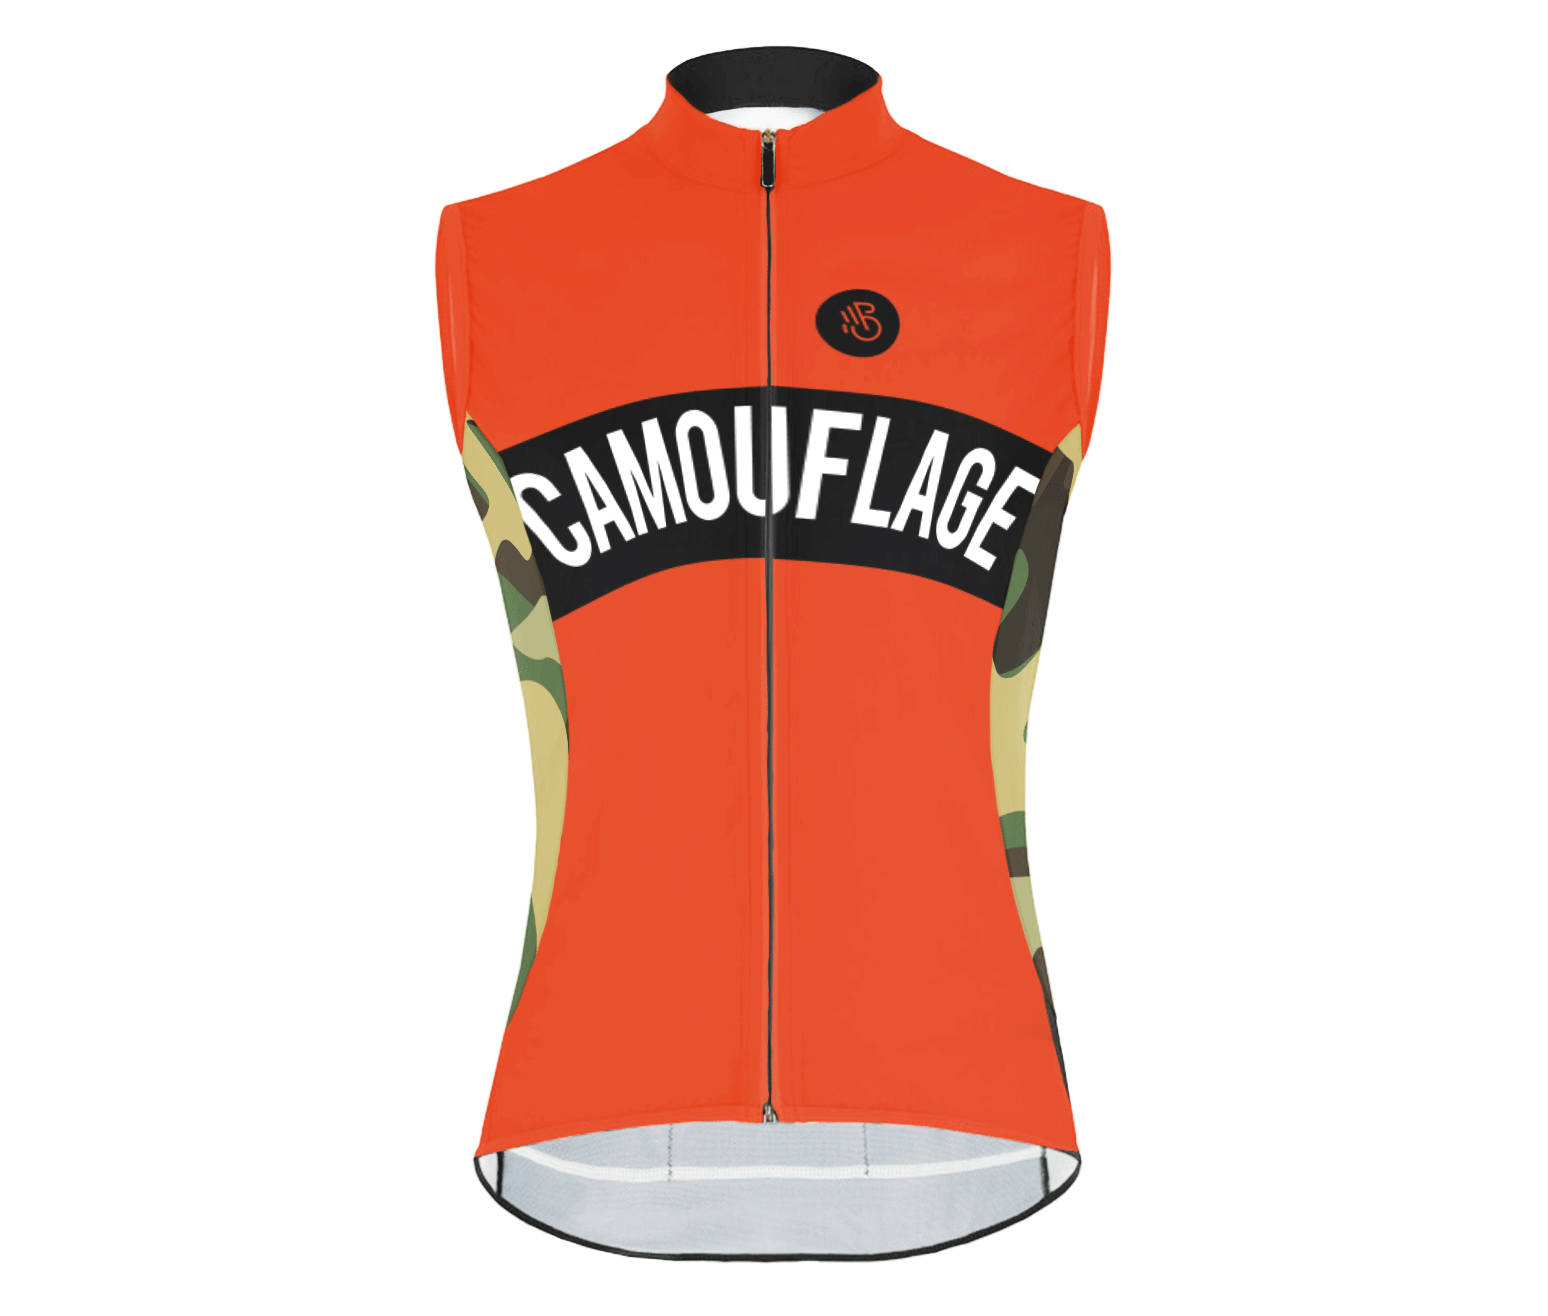 CAMOUFLAGE cycling vest